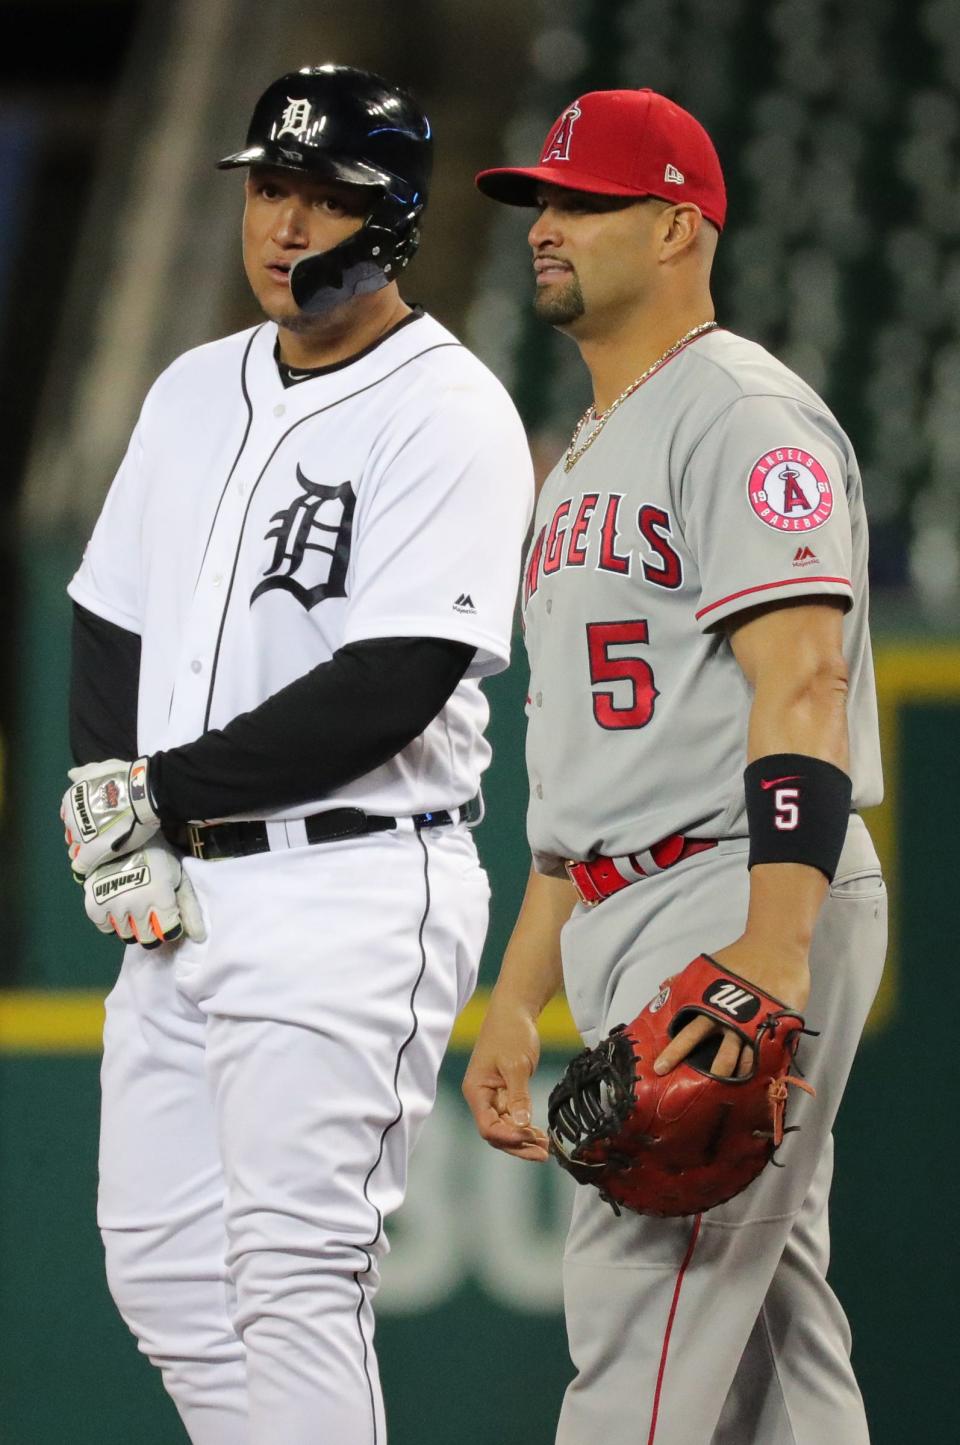  Los Angeles Angels first baseman Albert Pujols talks with  Detroit Tigers DH Miguel Cabrera during sixth inning action Tuesday, May 7, 2019 at Comerica Park in Detroit, Mich.